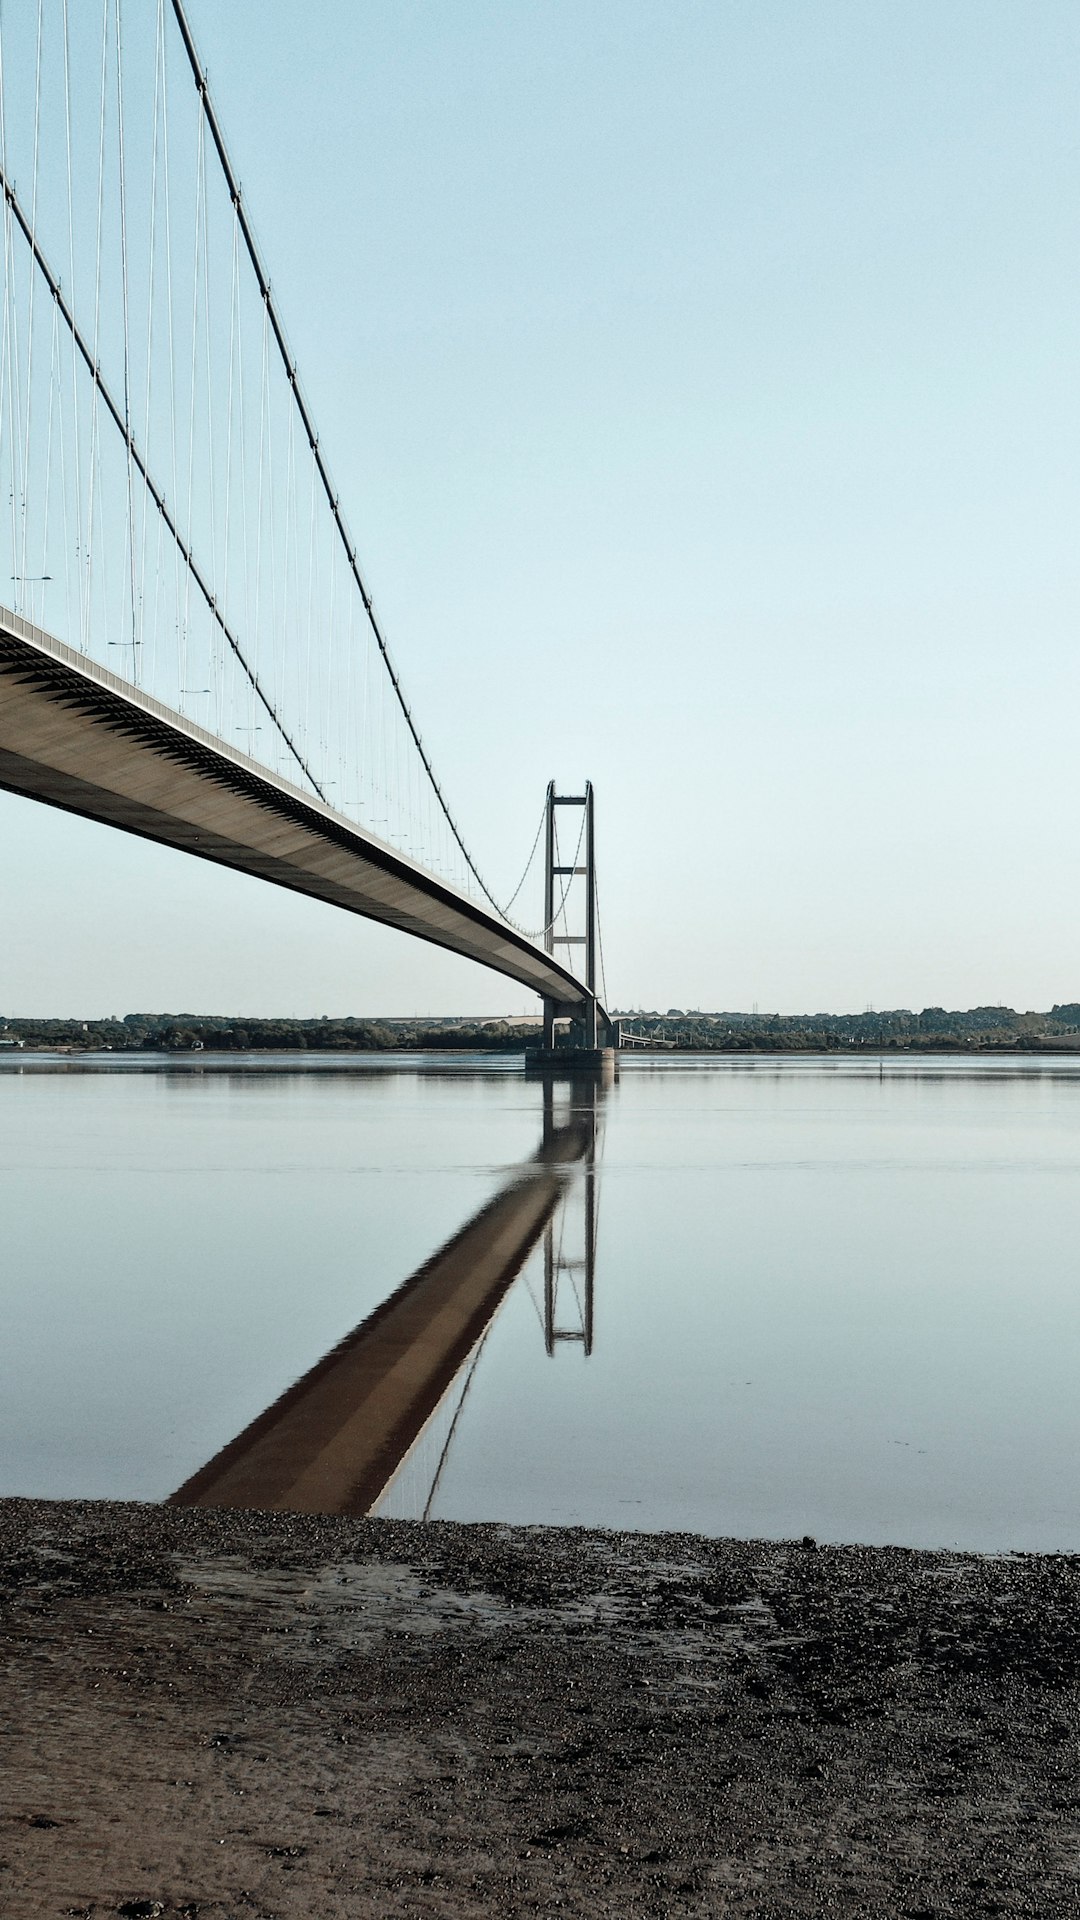 Travel Tips and Stories of Humber Bridge in United Kingdom